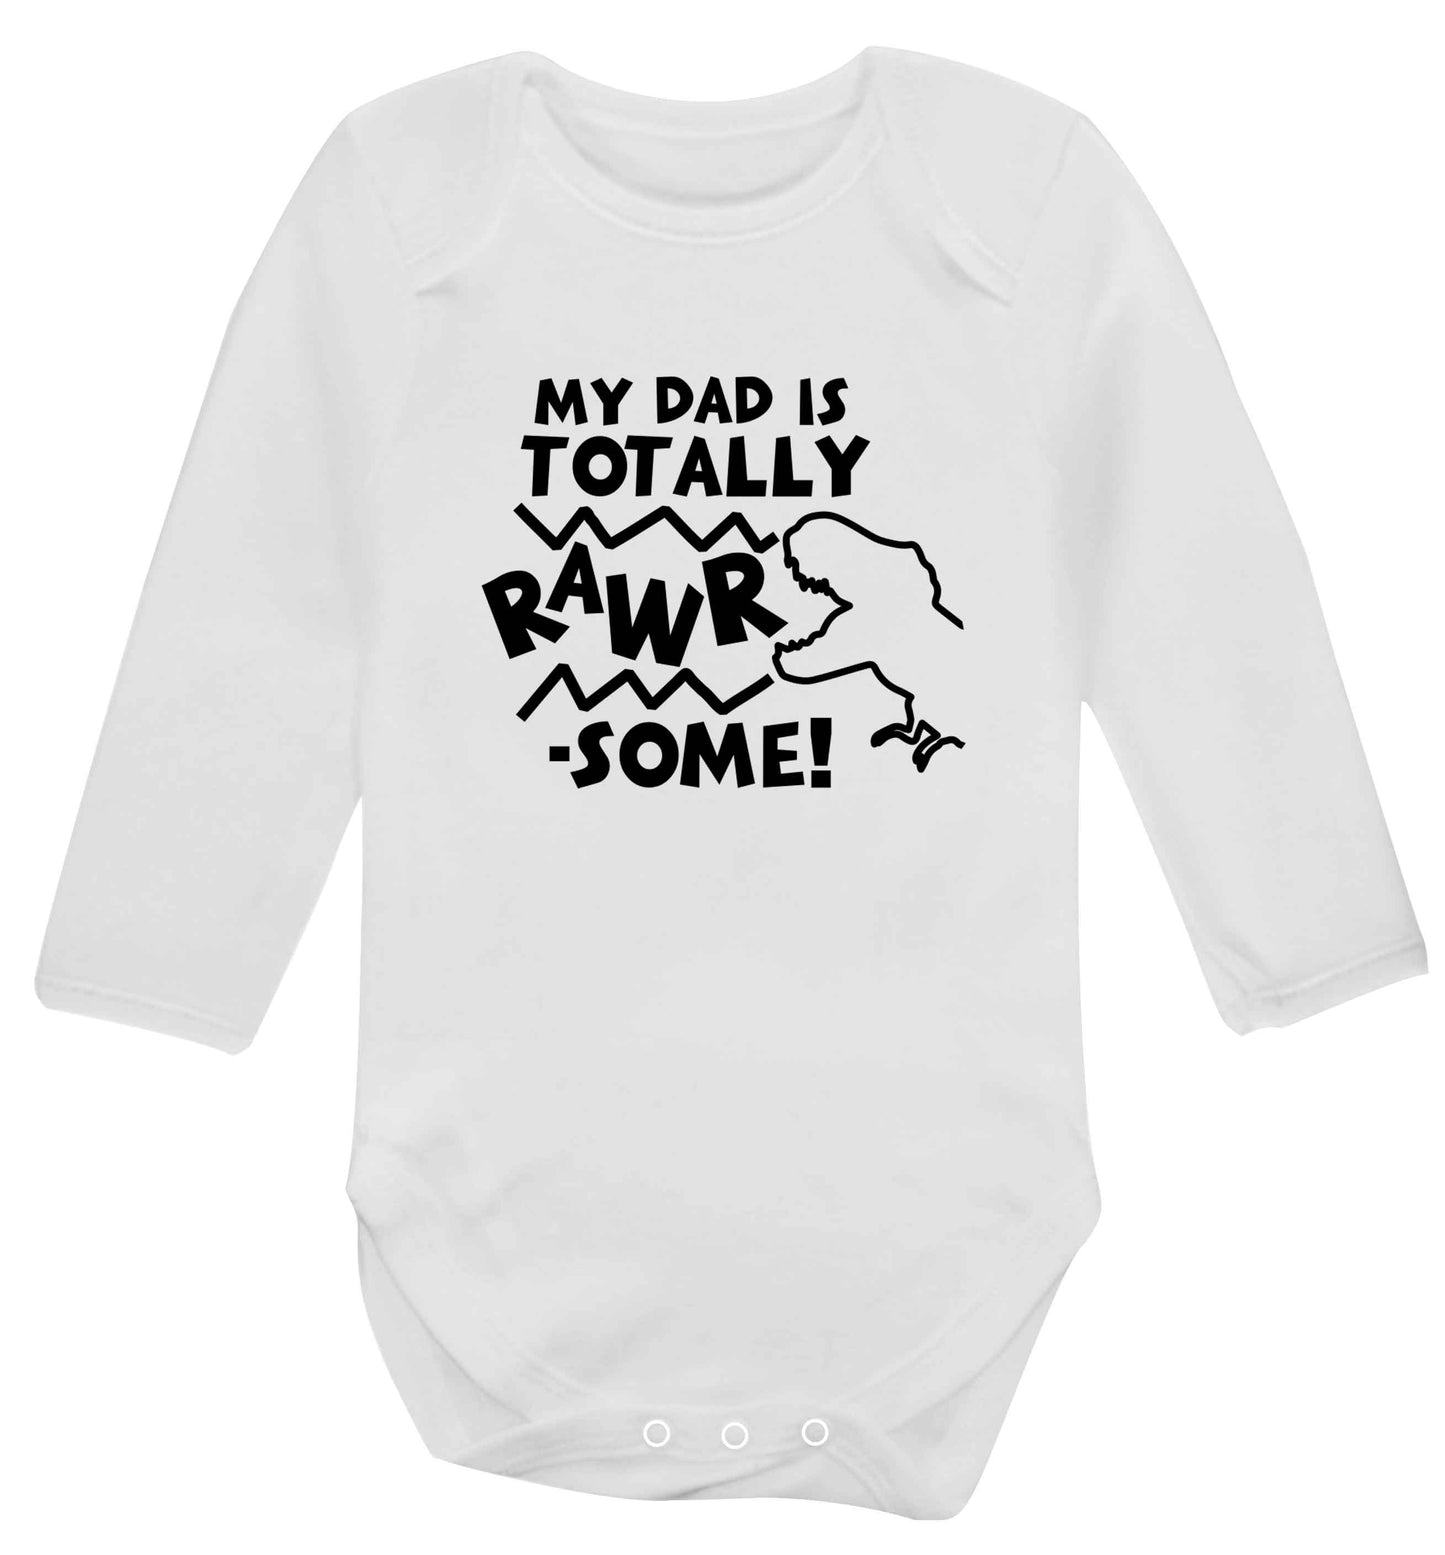 My dad is totally rawrsome baby vest long sleeved white 6-12 months